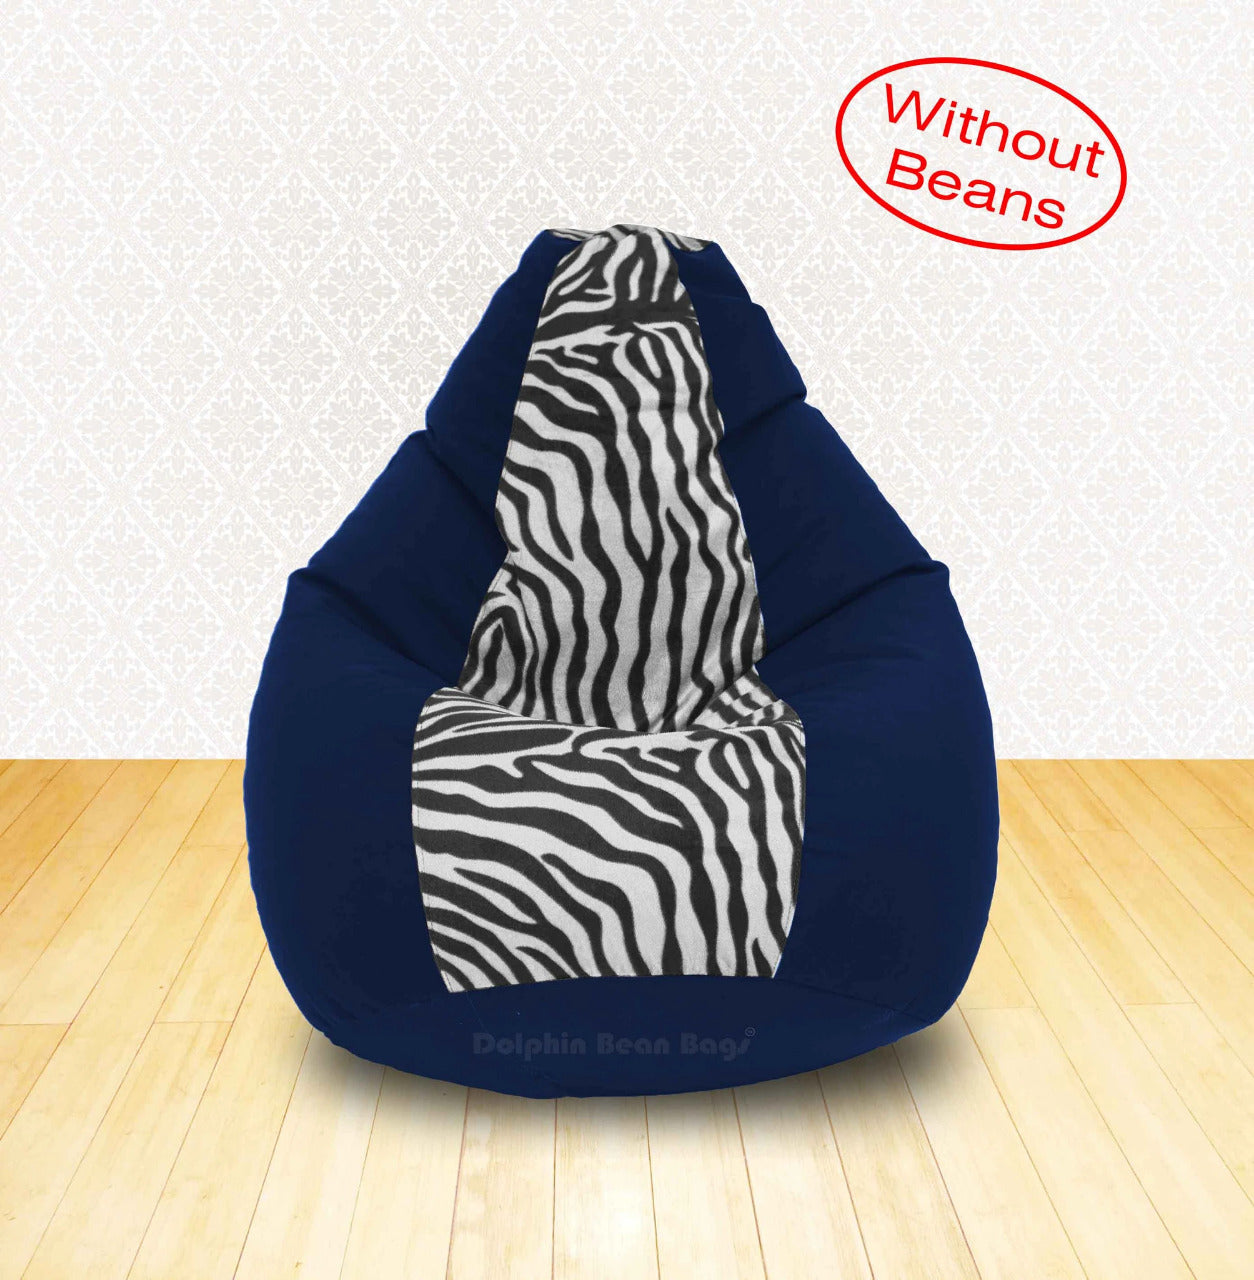  Bean Bag XL N.Blue Zebra(Blk-White)-FABRIC-COVERS(without Beans)